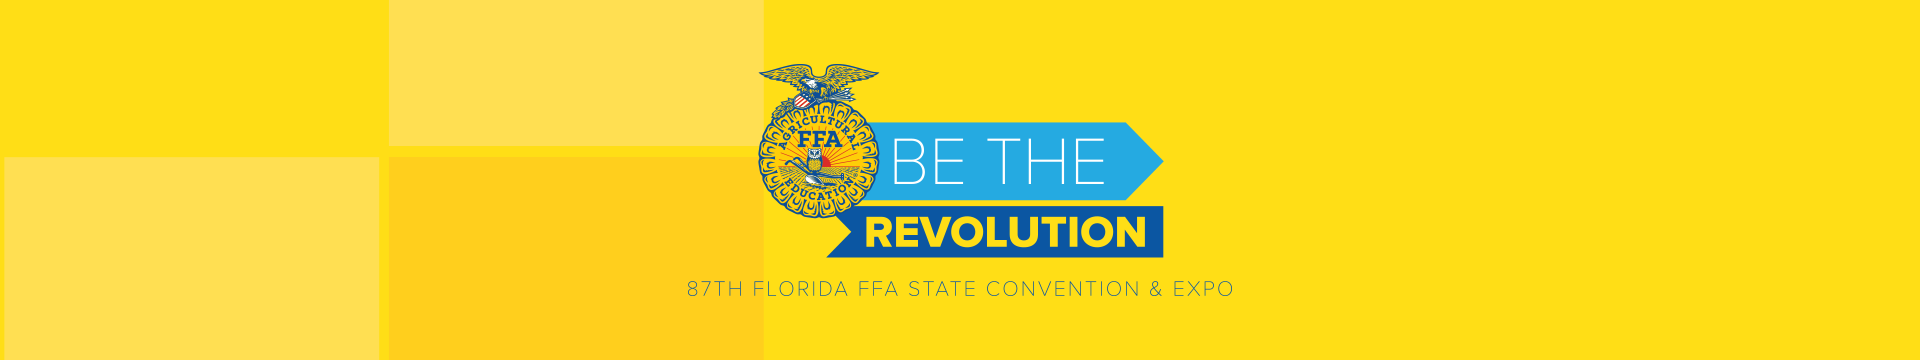 Florida FFA Selects Talent Acts for 2015 Convention & Expo